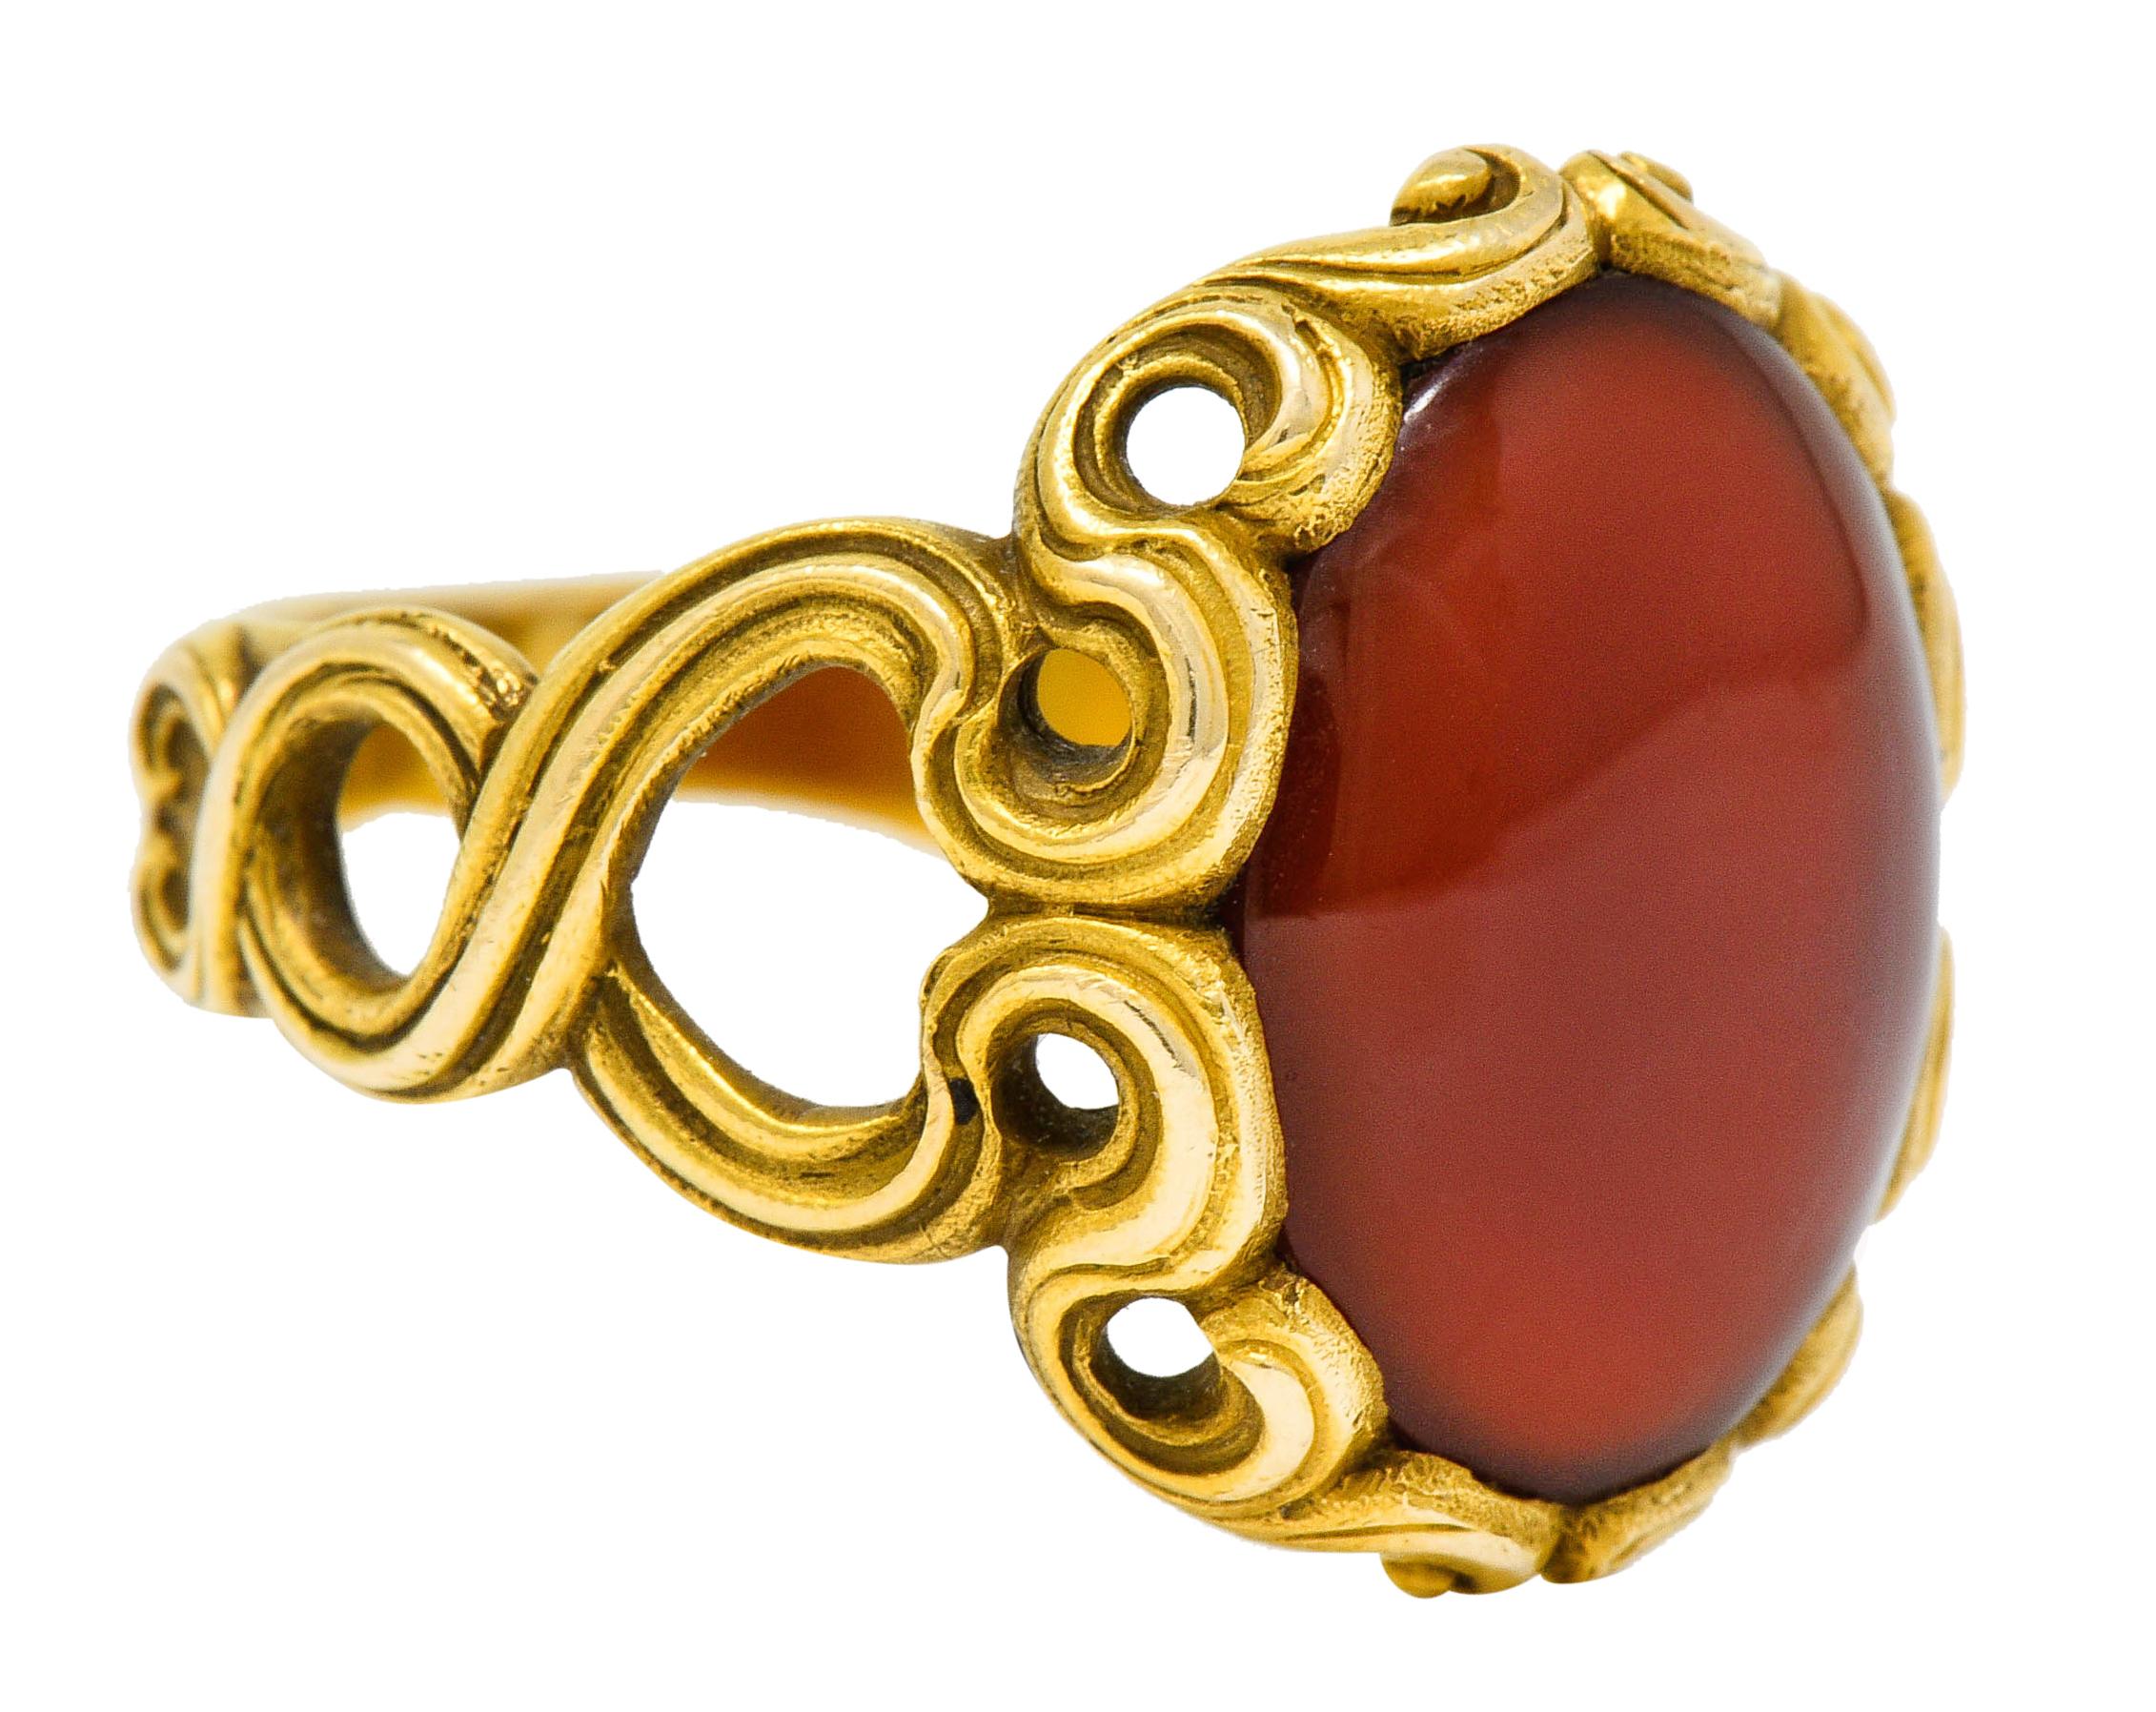 Centering an oval cabochon of carnelian measuring approximately 15.5 x 11.5 mm

Translucent with uniform brownish-red color

With a scrolled whiplash surround and winding whiplash shoulders

Tested as 14 karat gold

Circa: 1905

Ring Size: 8 3/4 &